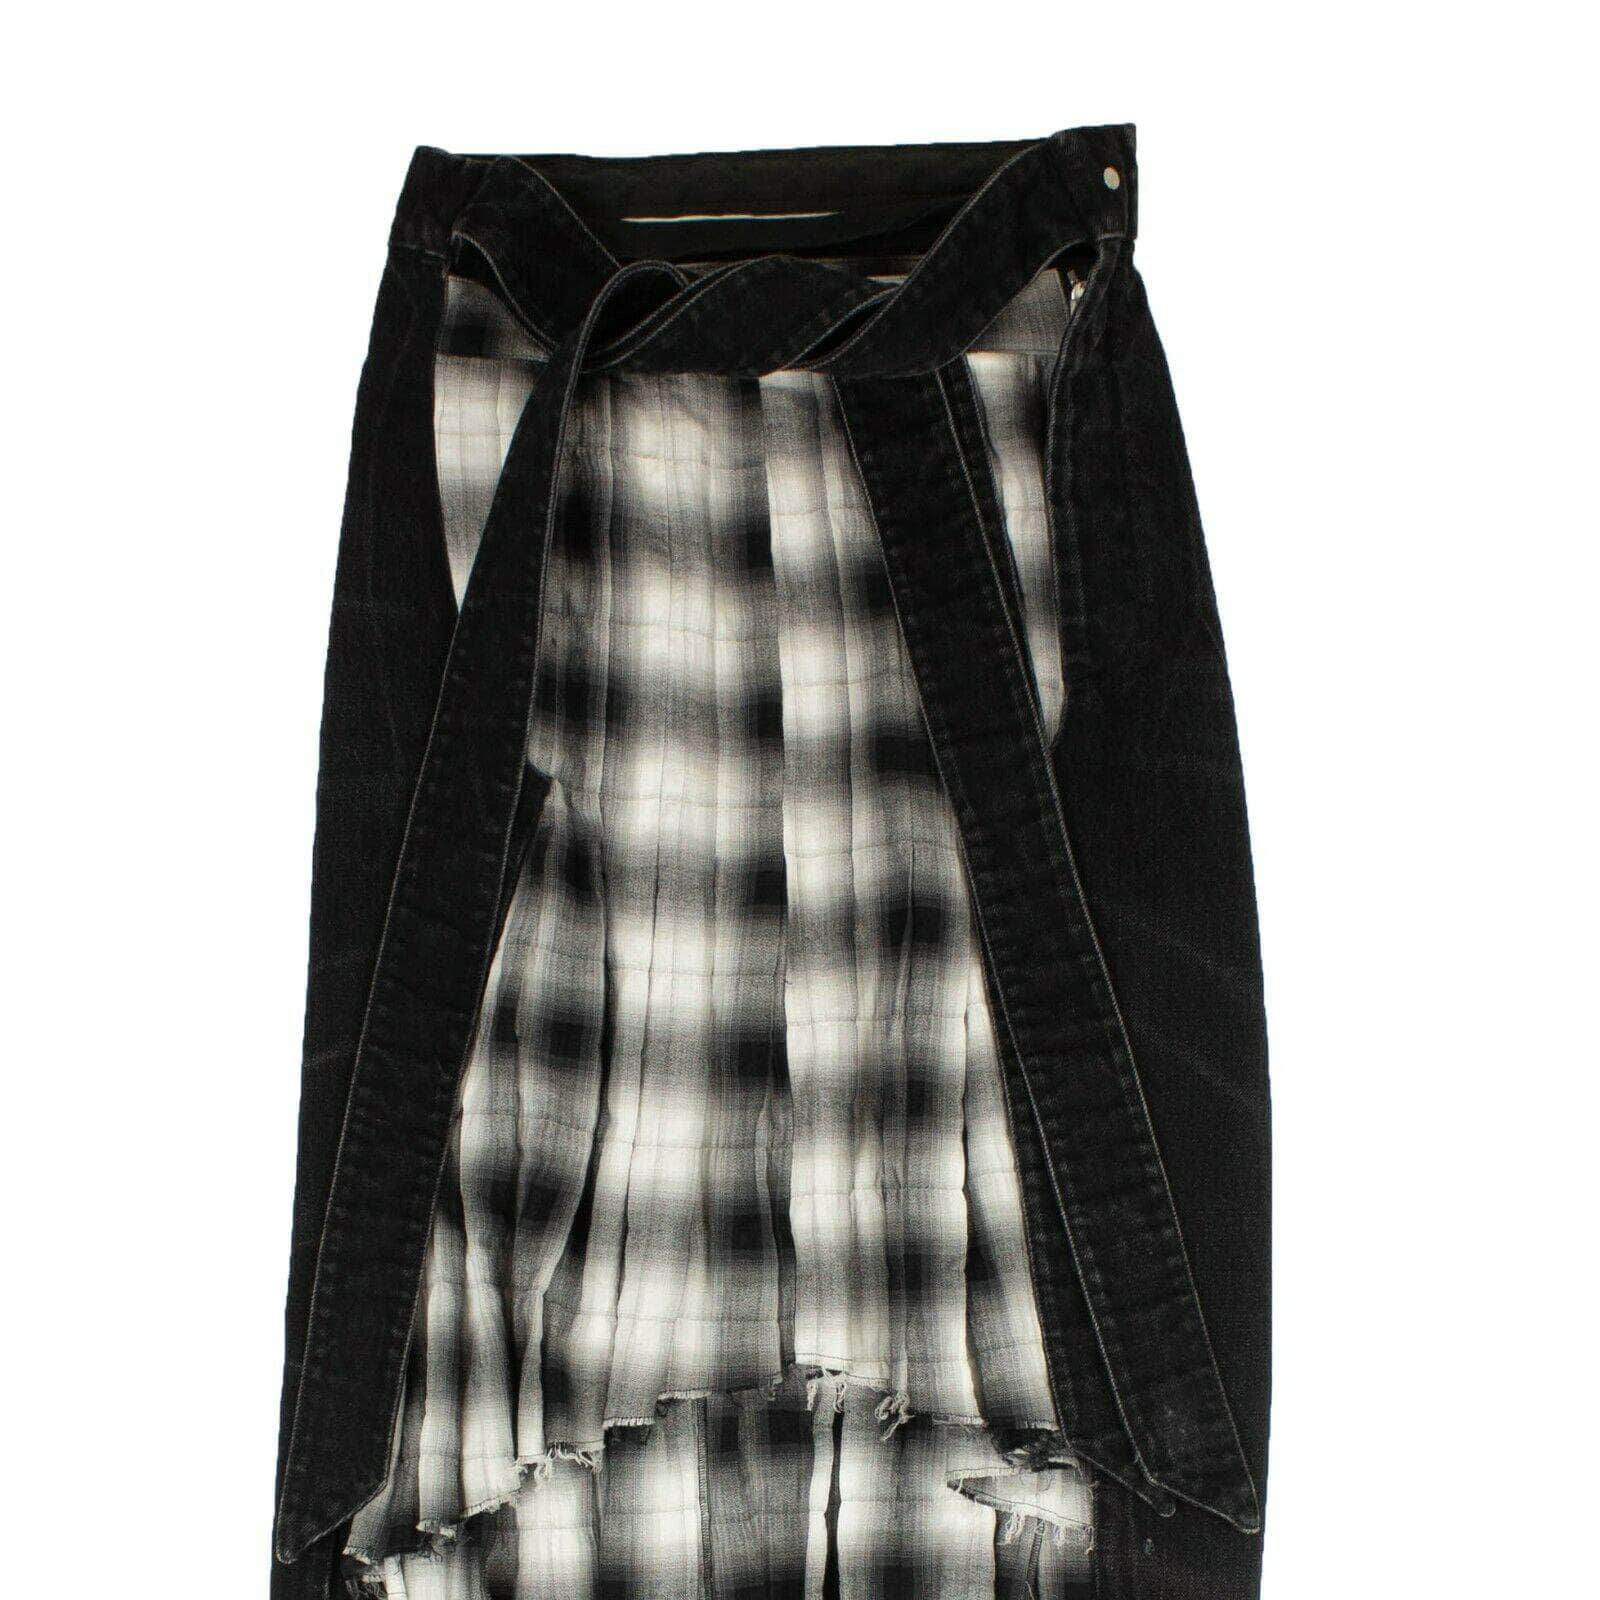 Unravel Project 250-500, channelenable-all, chicmi, couponcollection, gender-womens, main-clothing, size-40, unravel-project, womens-shirts 40 / 82NGG-UN-1112/40 Black and White Plaid Skirt 82NGG-UN-1112/40 82NGG-UN-1112/40